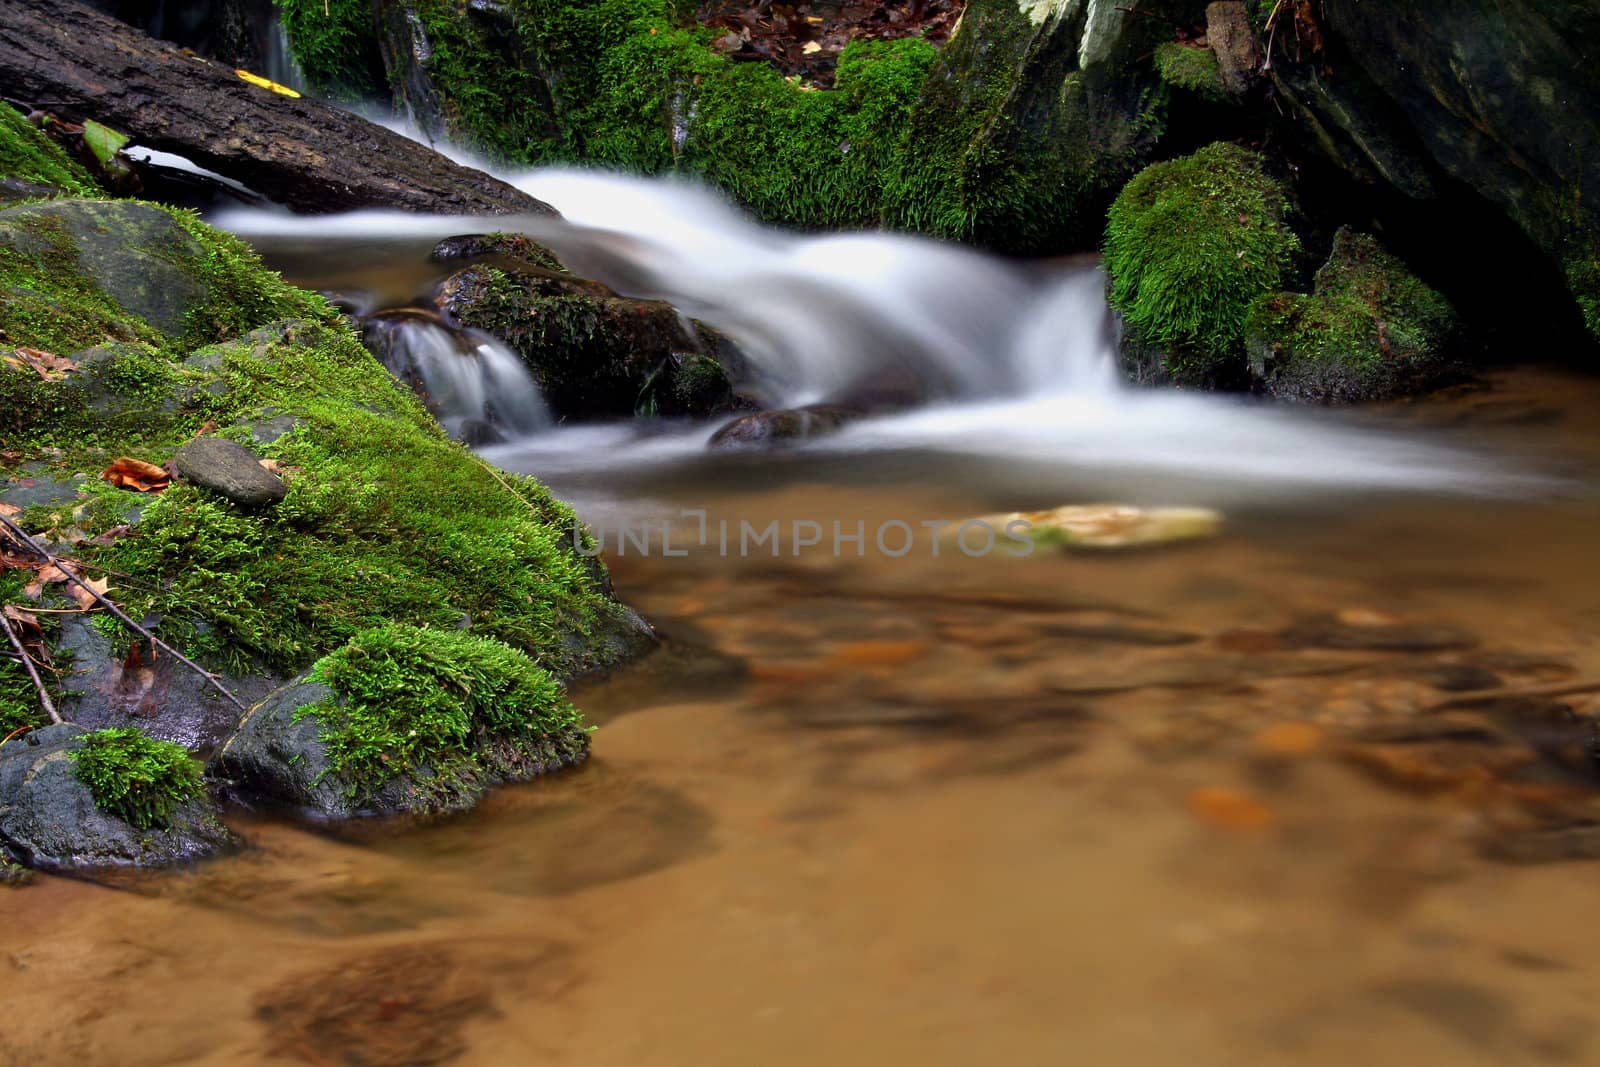 Small water fall with moss covered rocks.